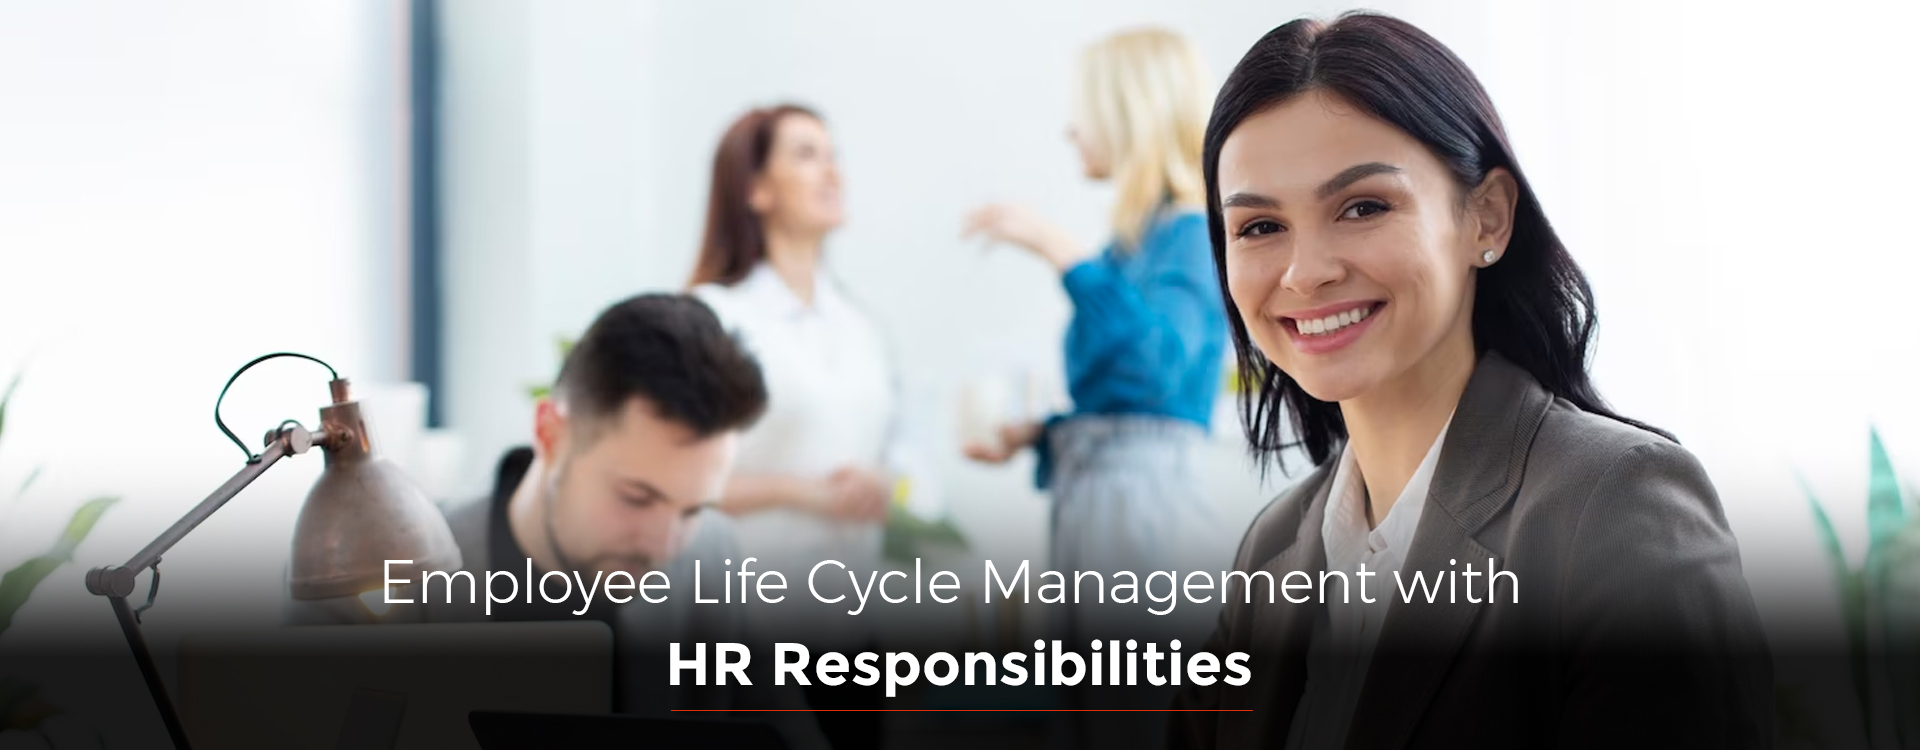 Employee Life Cycle Management with HR Responsibilities